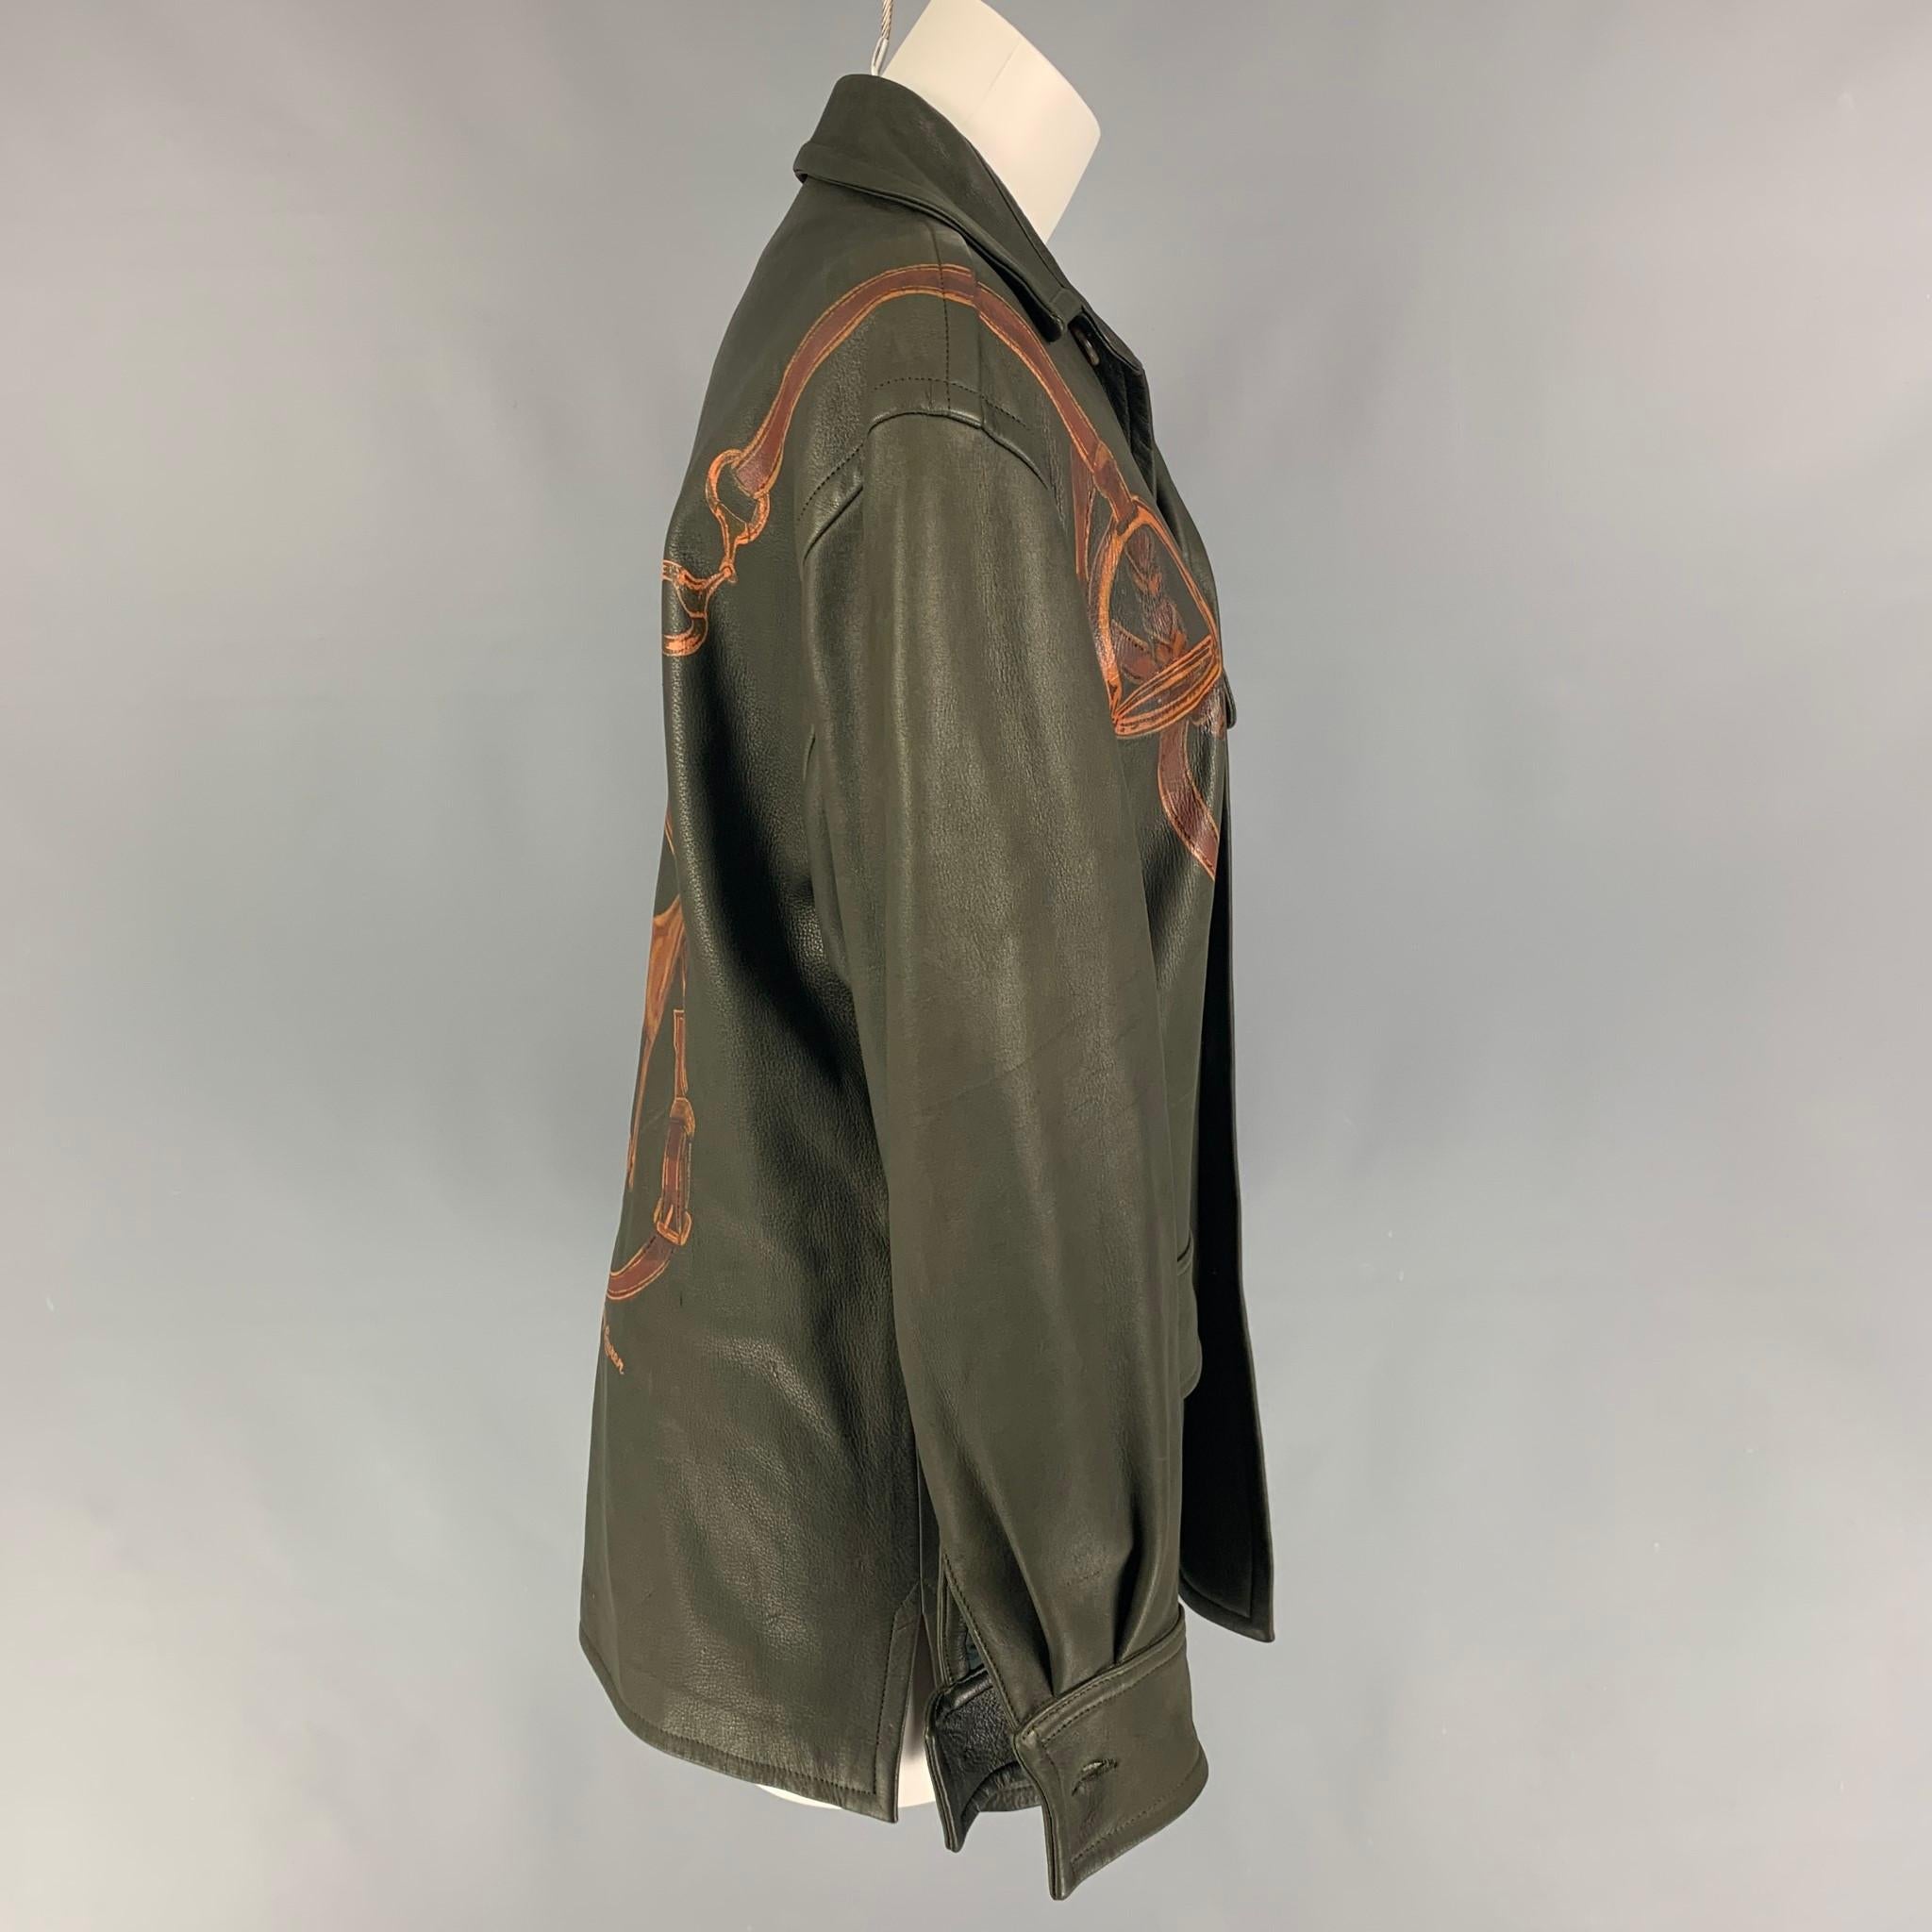 Vintage RALPH LAUREN jacket comes in a olive leather with a full liner featuring a large horse print design, flap pockets, spread collar, and a buttoned closure. 

Good Pre-Owned Condition.
Marked: 4

Measurements:

Shoulder: 20 in.
Bust: 40